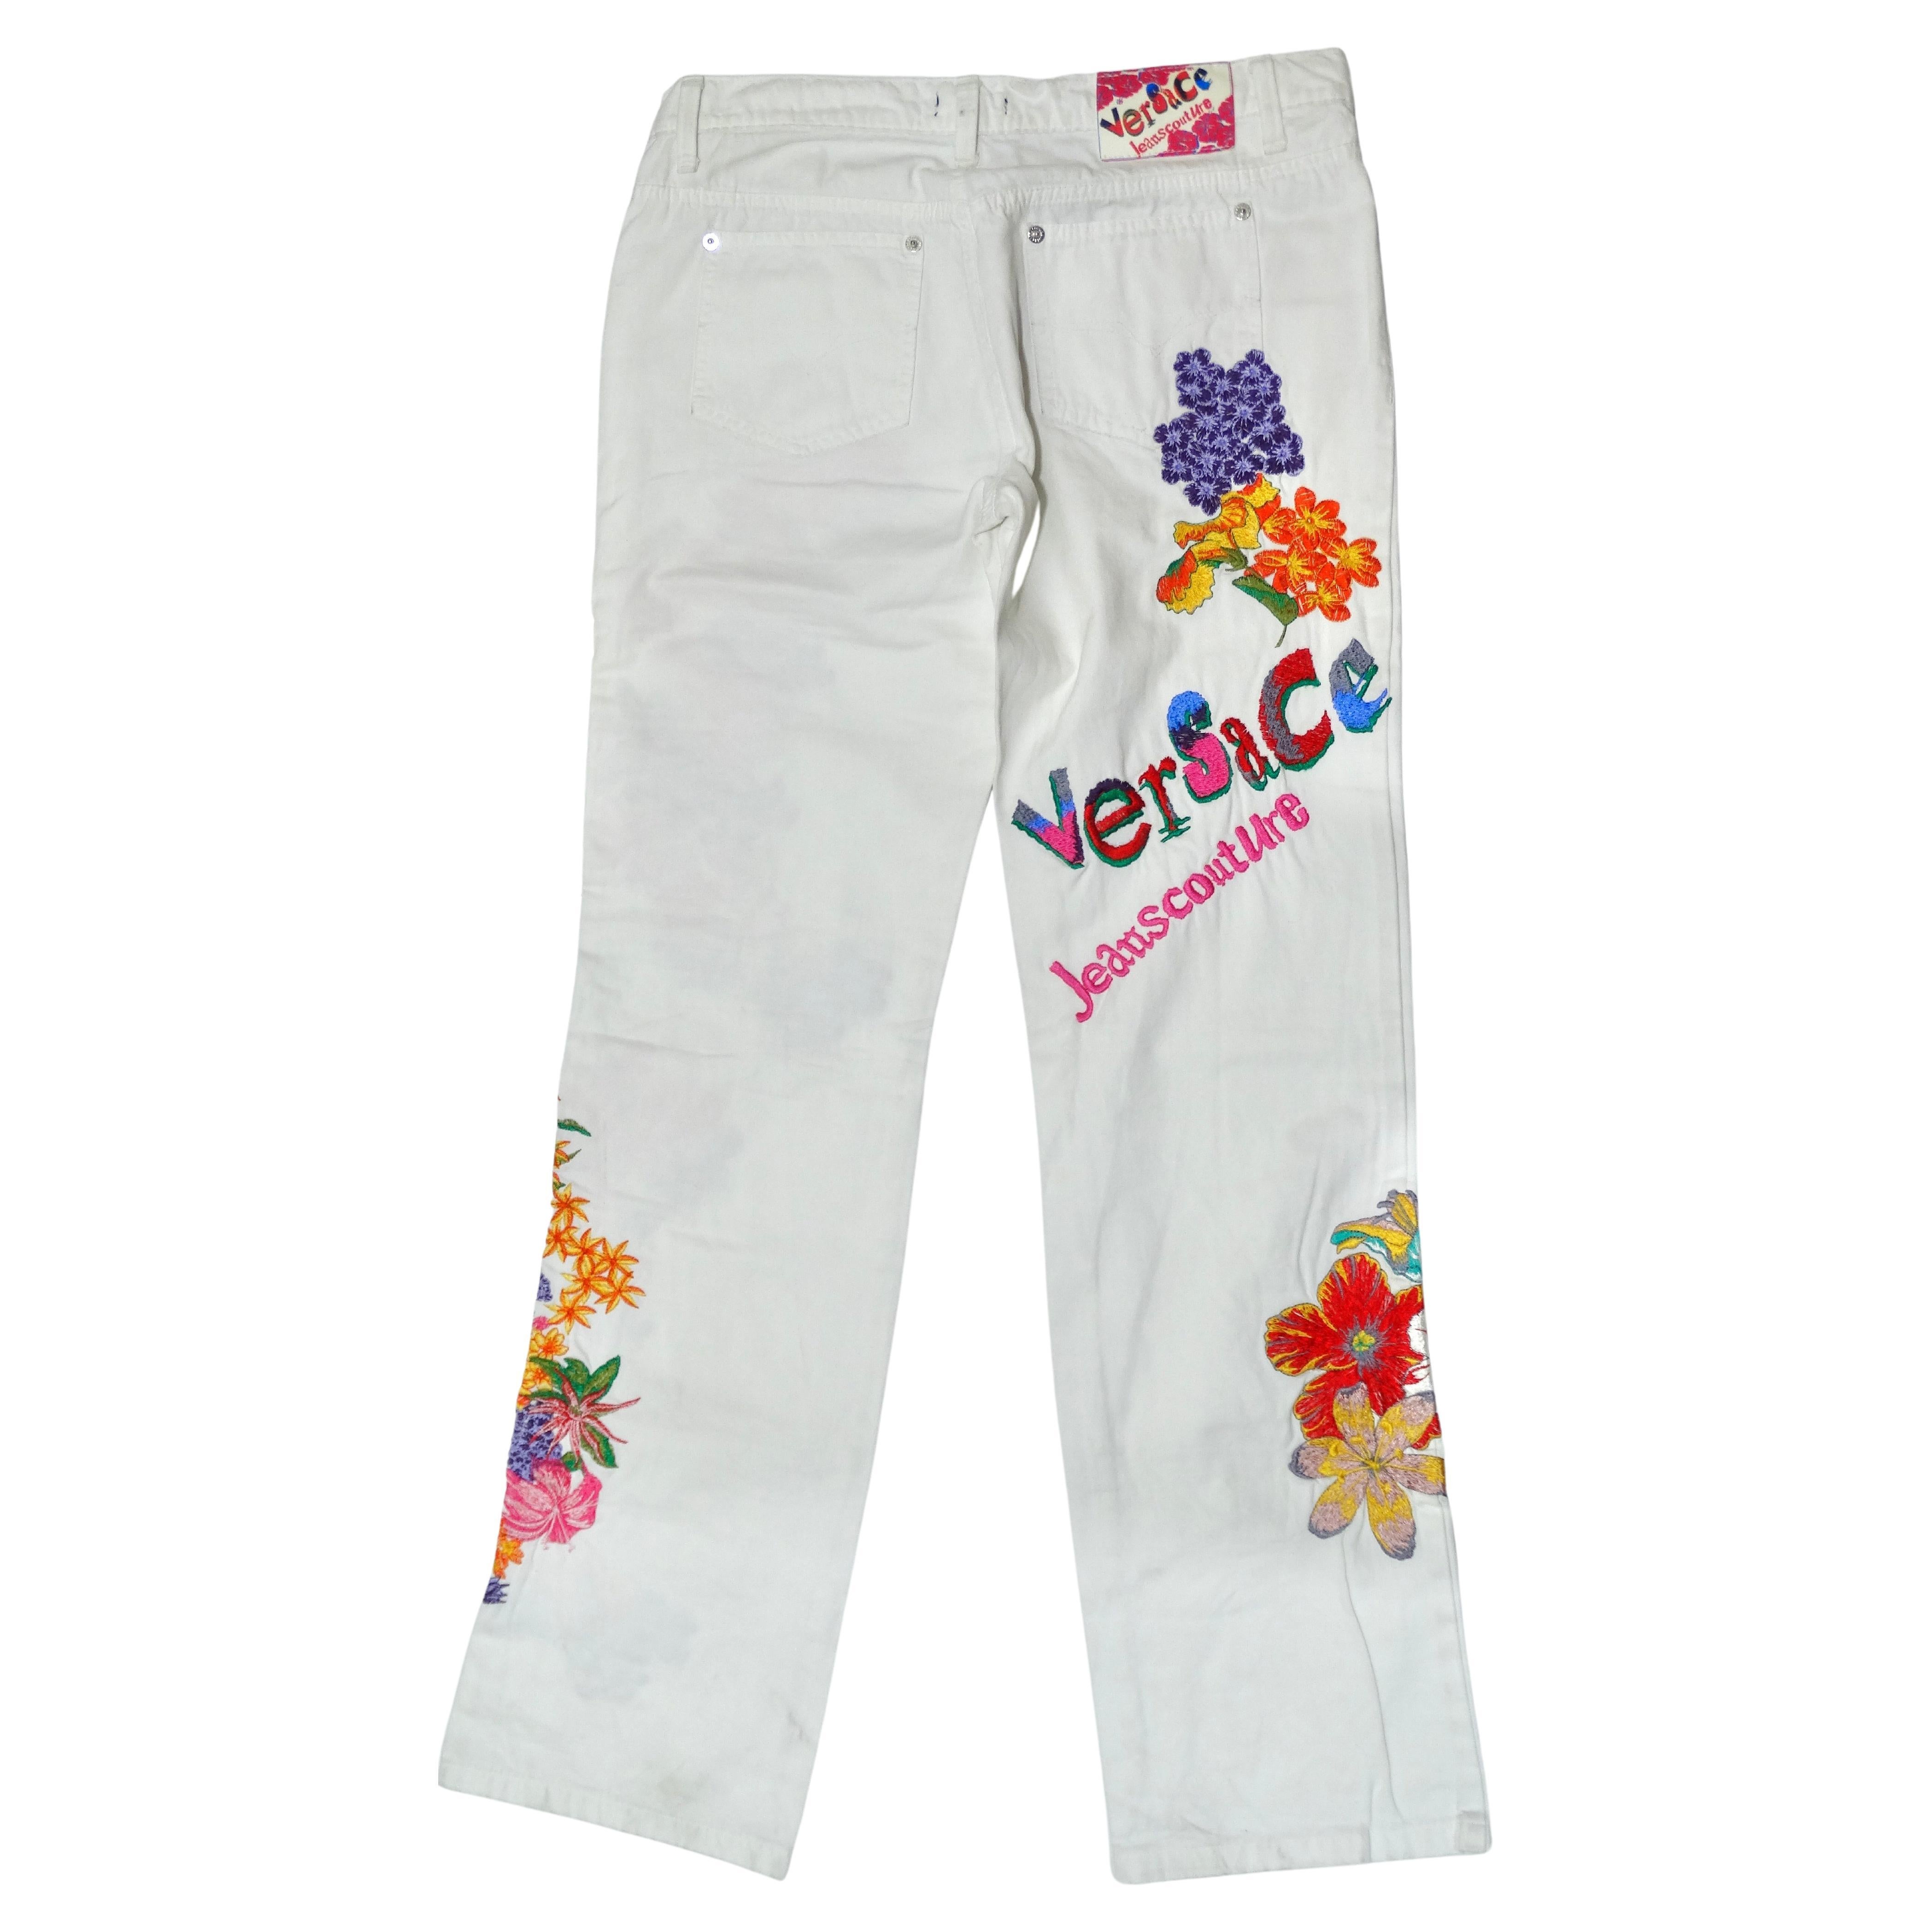 Don't miss out on the chance to get a beautifully detailed pair of Versace Jeans Couture. These feature intricate floral and letter embroidering in a beautiful color combo of purple, pink, and orange. The mix of delicate of flowers and bold